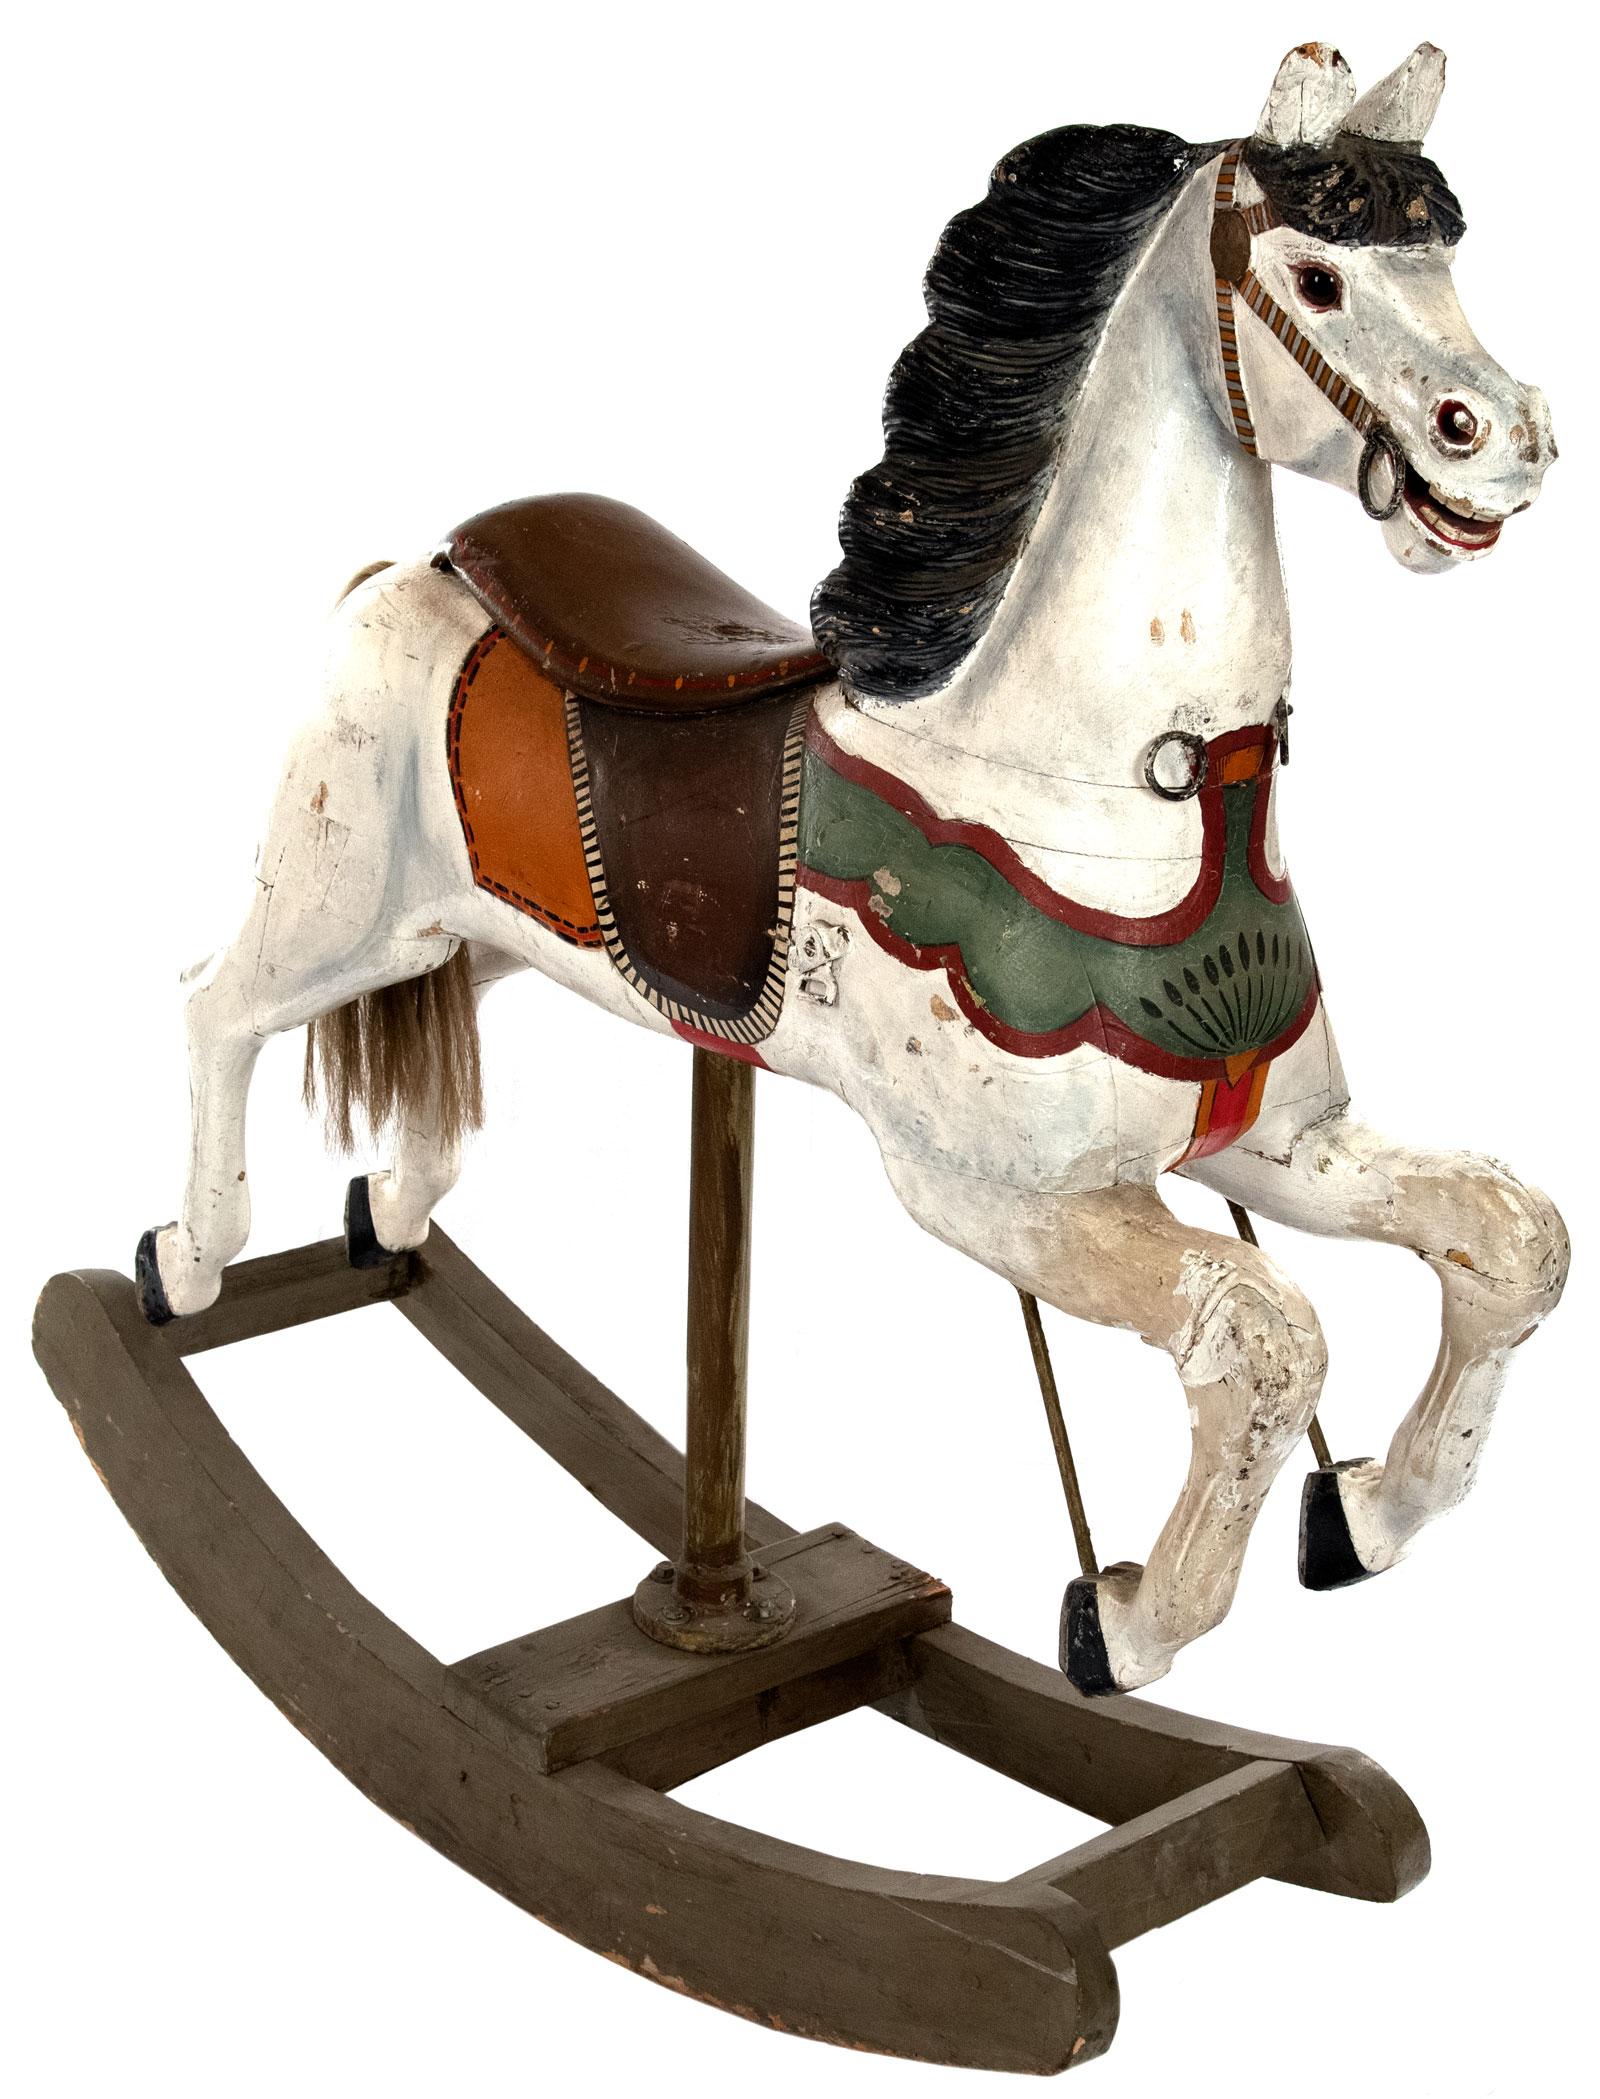 Originally part of a Parisian carousel in the 1880s, this carved wood and polychromed horse was saved when the amusement ride was torn down in the 1920s and repurposed as a rocking horse.